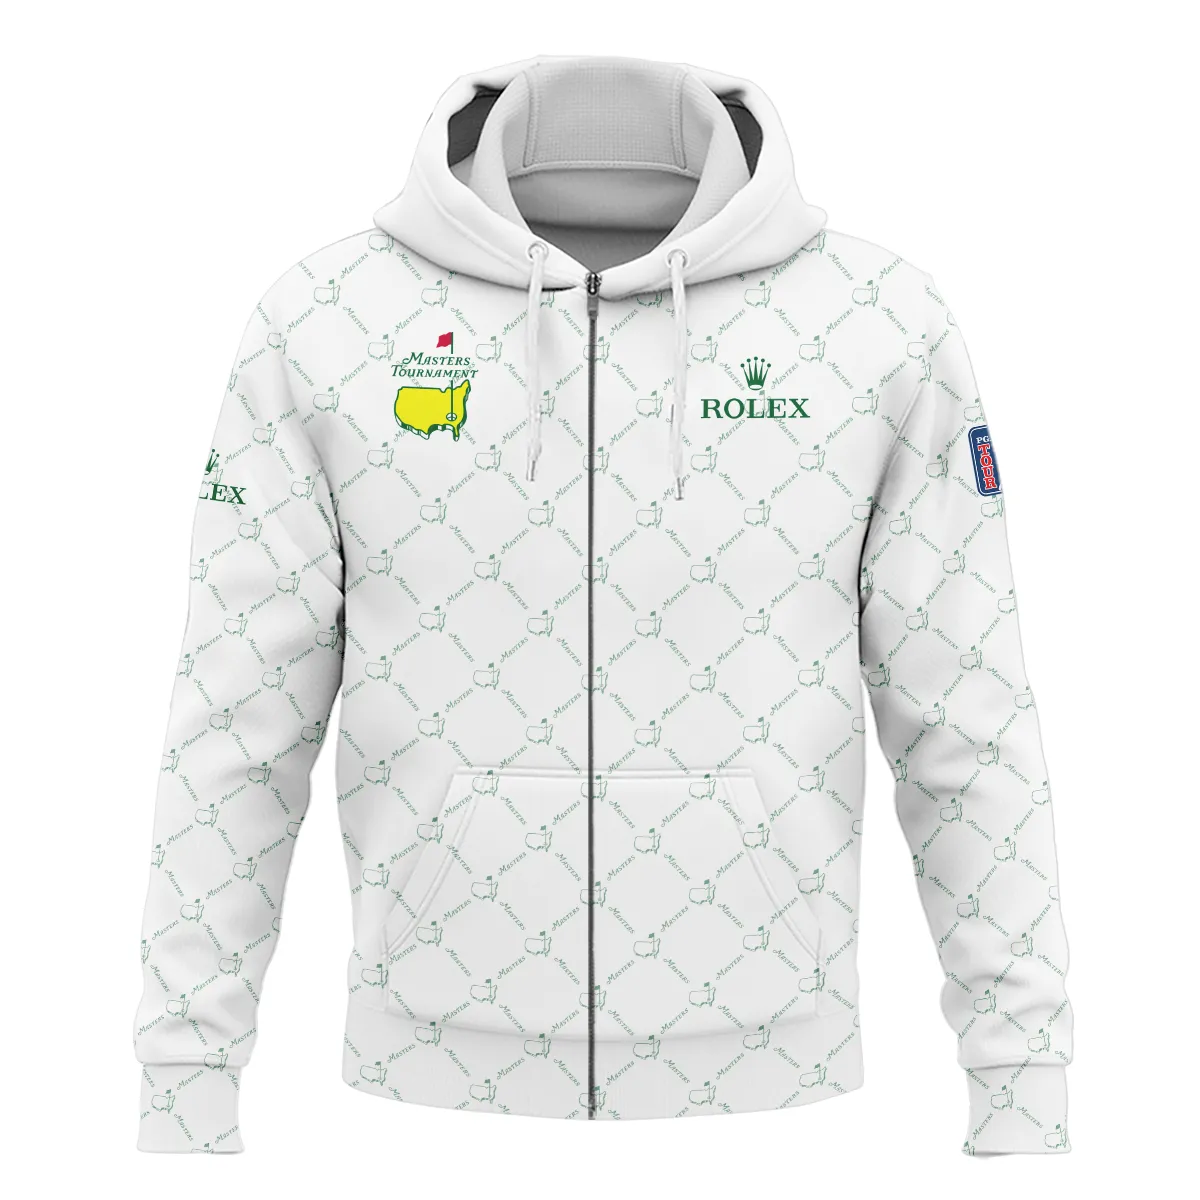 Golf Sport Pattern Color White Mix Masters Tournament Rolex Zipper Hoodie Shirt Style Classic